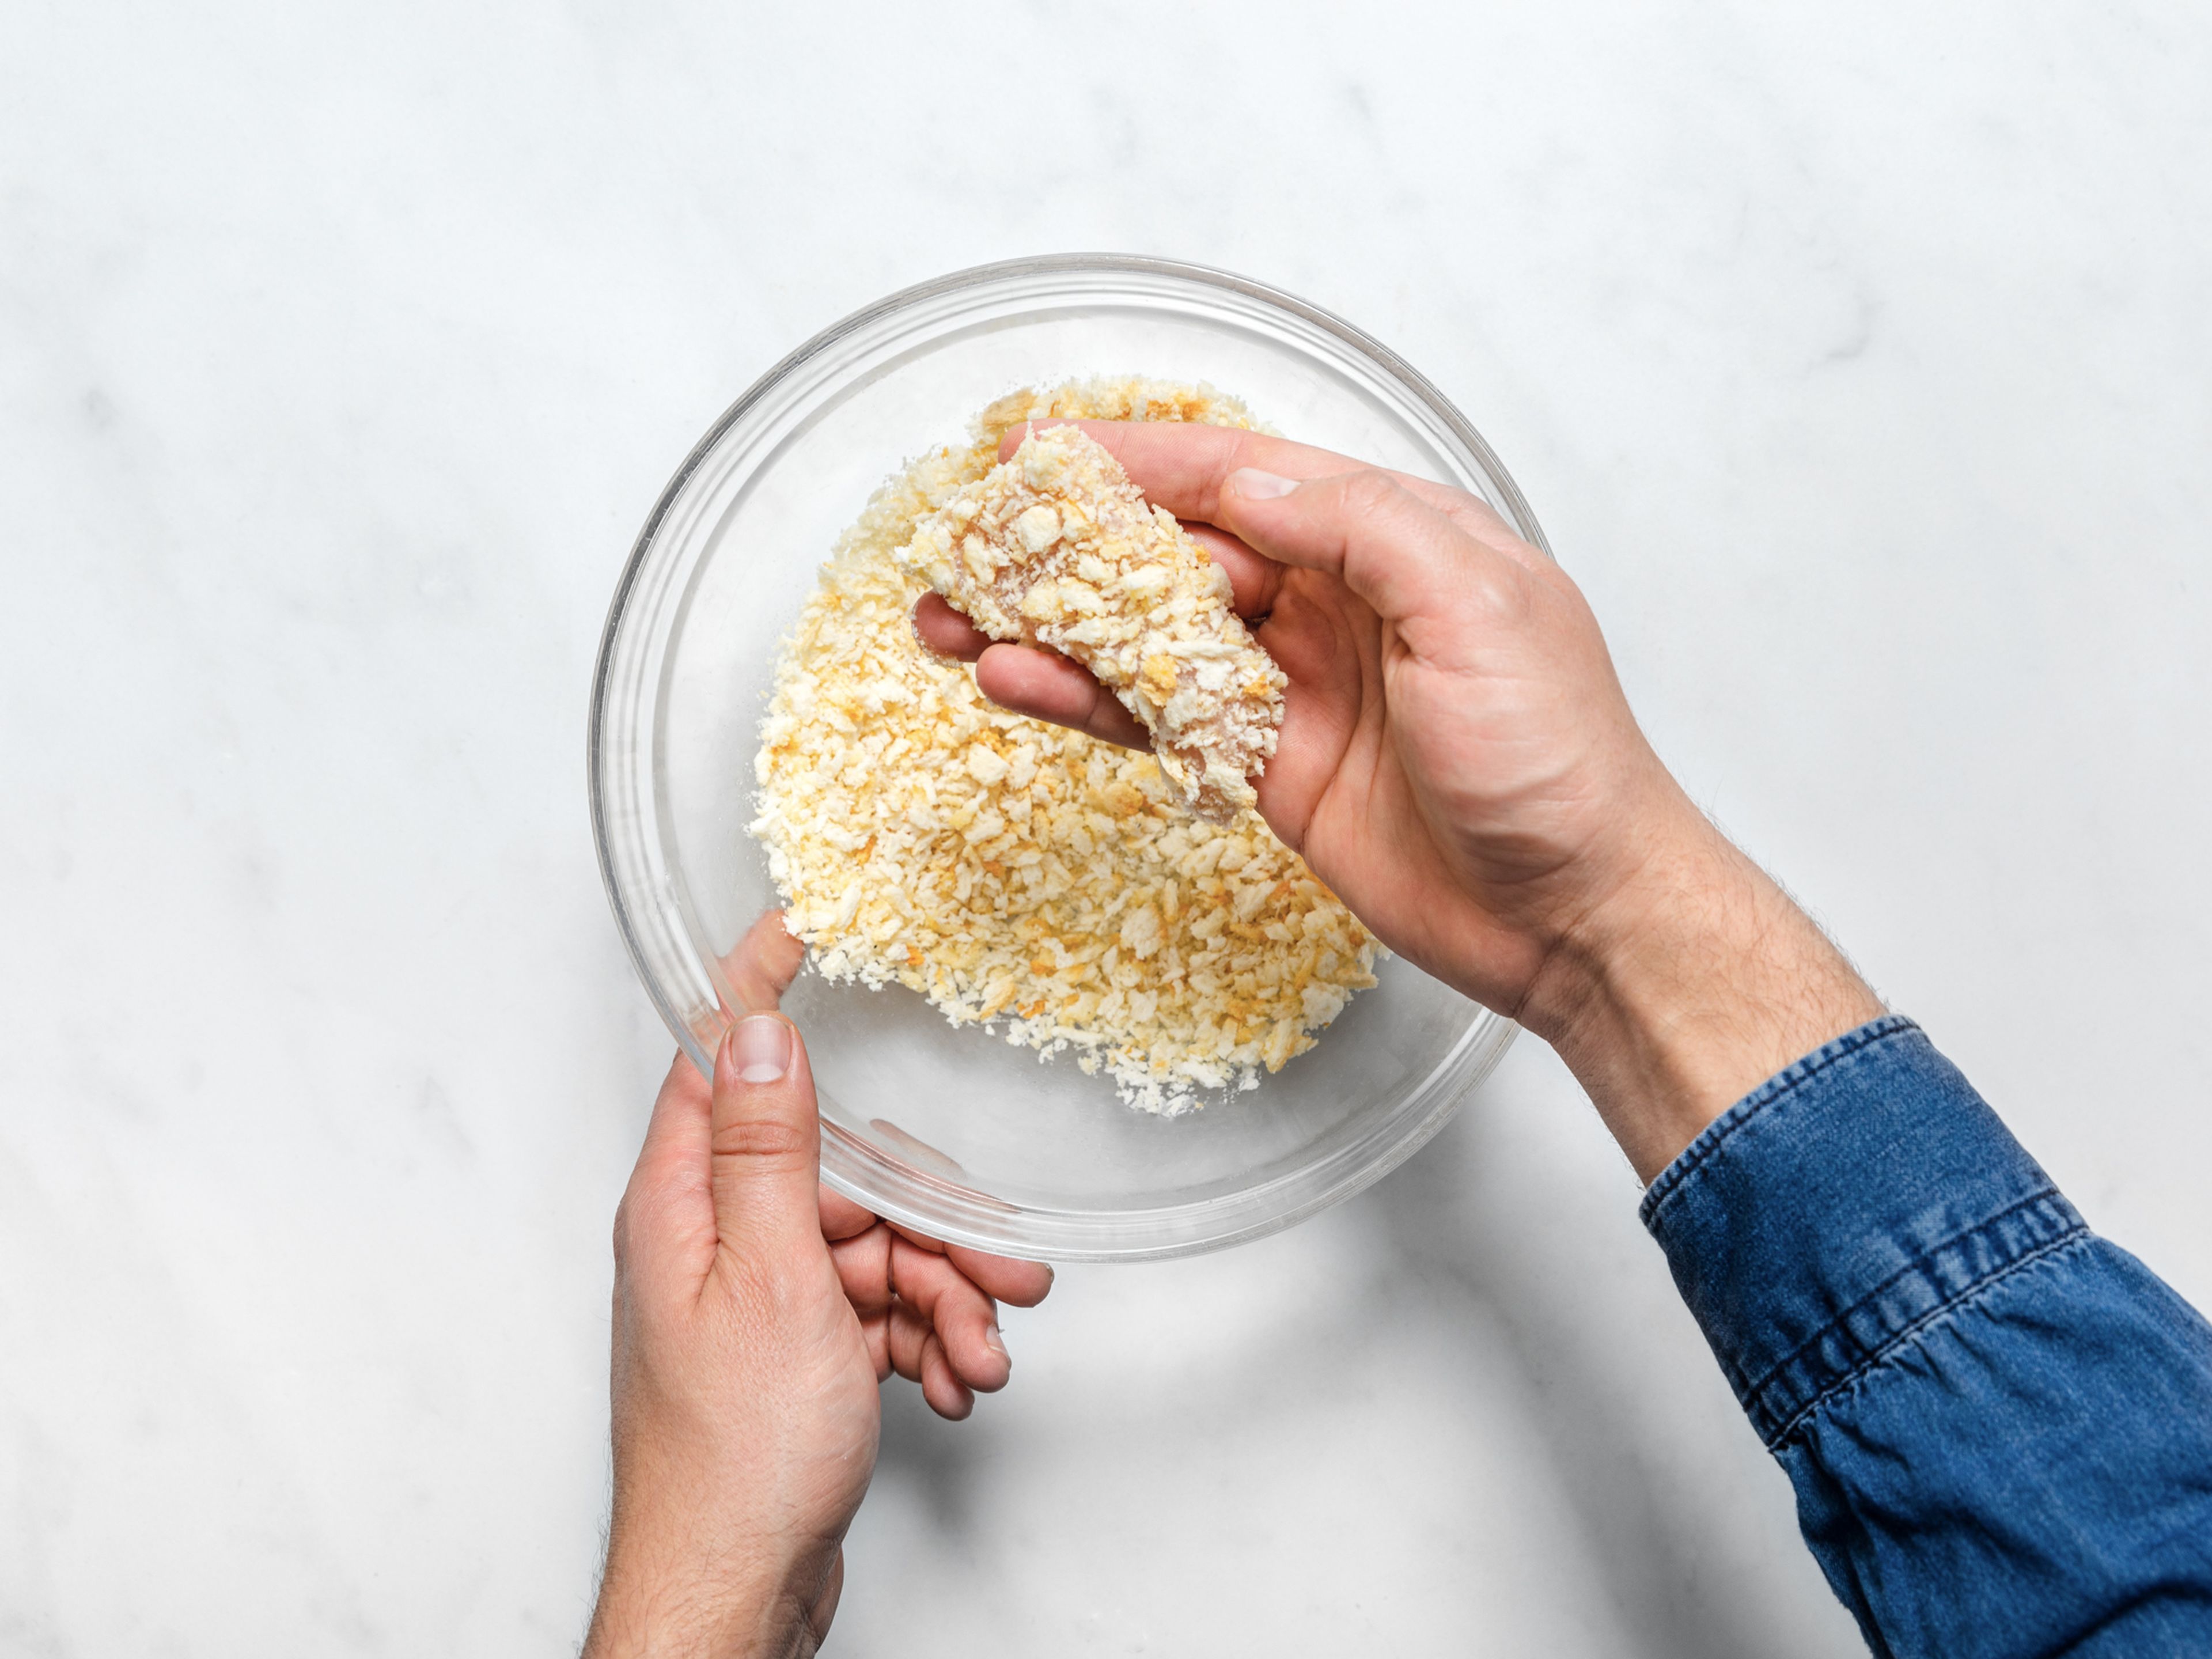 Transfer cooled, toasted breadcrumbs to another large bowl. Dredge the chicken strips completely in breadcrumbs, then transfer to the same baking sheet you toasted the breadcrumbs on. Repeat with all chicken strips.